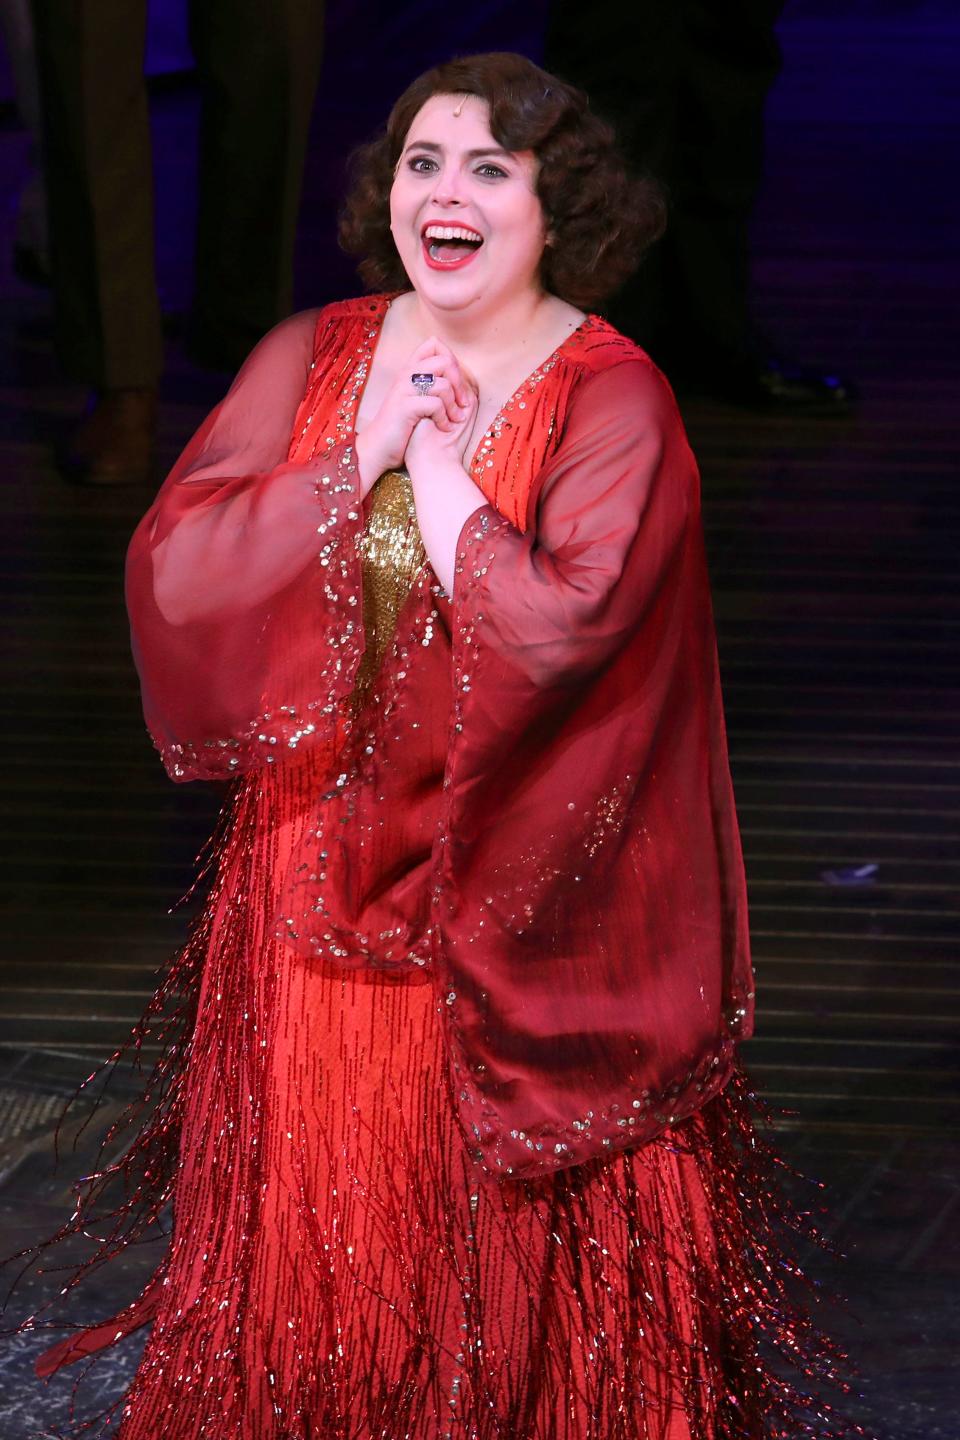 Beanie Feldstein appears on stage during the Broadway opening night curtain call of "Funny Girl" at the August Wilson Theatre on Sunday, April 24, 2022, in New York.